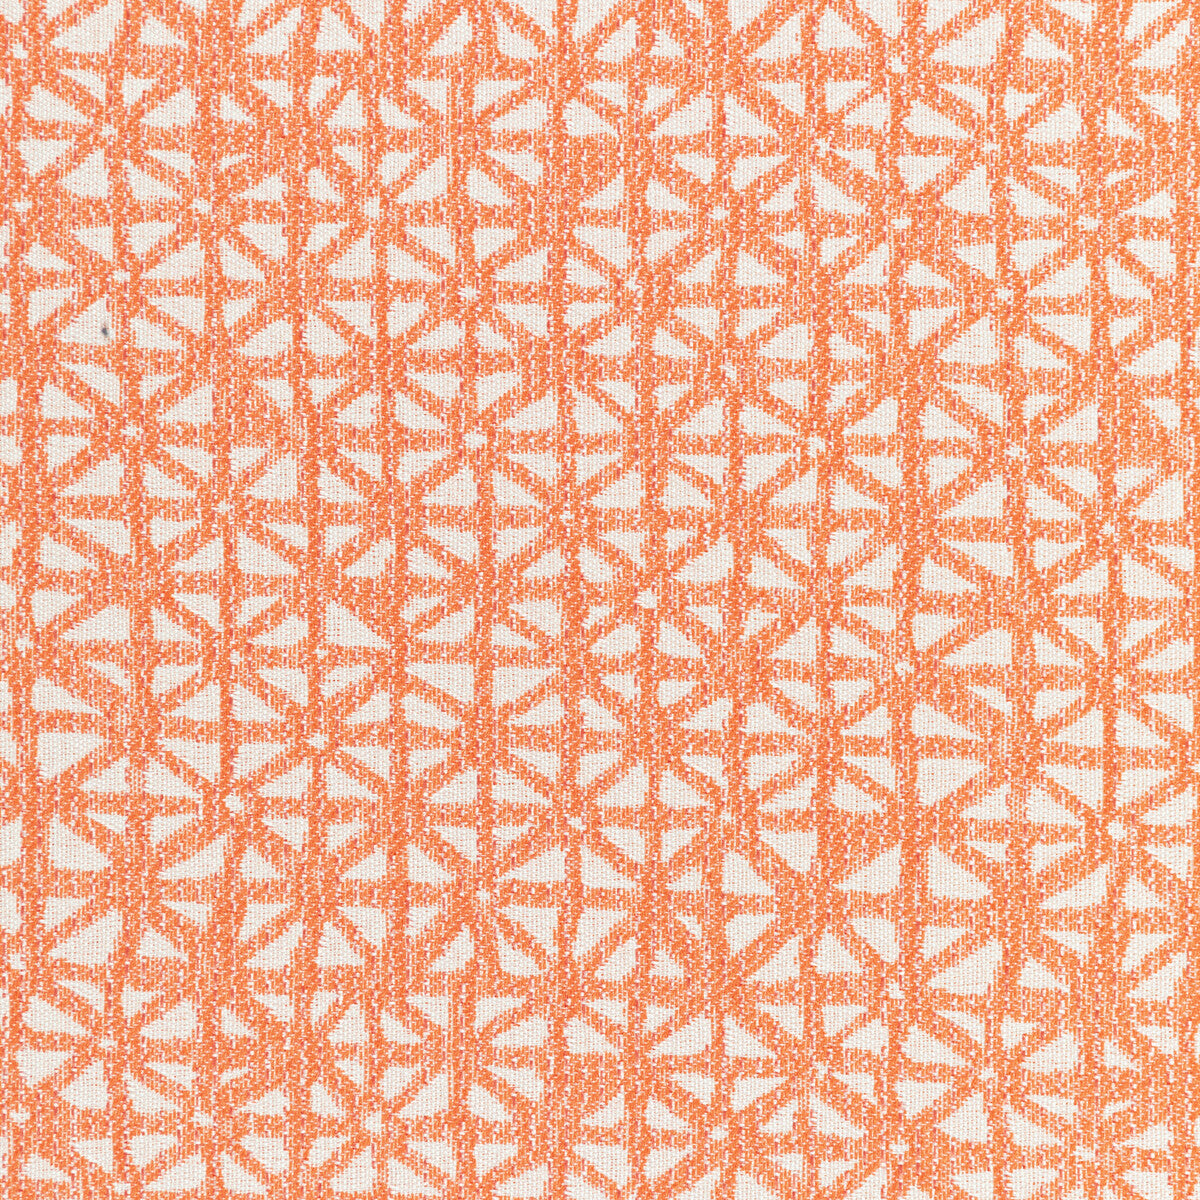 Kinzie fabric in coral color - pattern 36268.12.0 - by Kravet Contract in the Gis Crypton collection